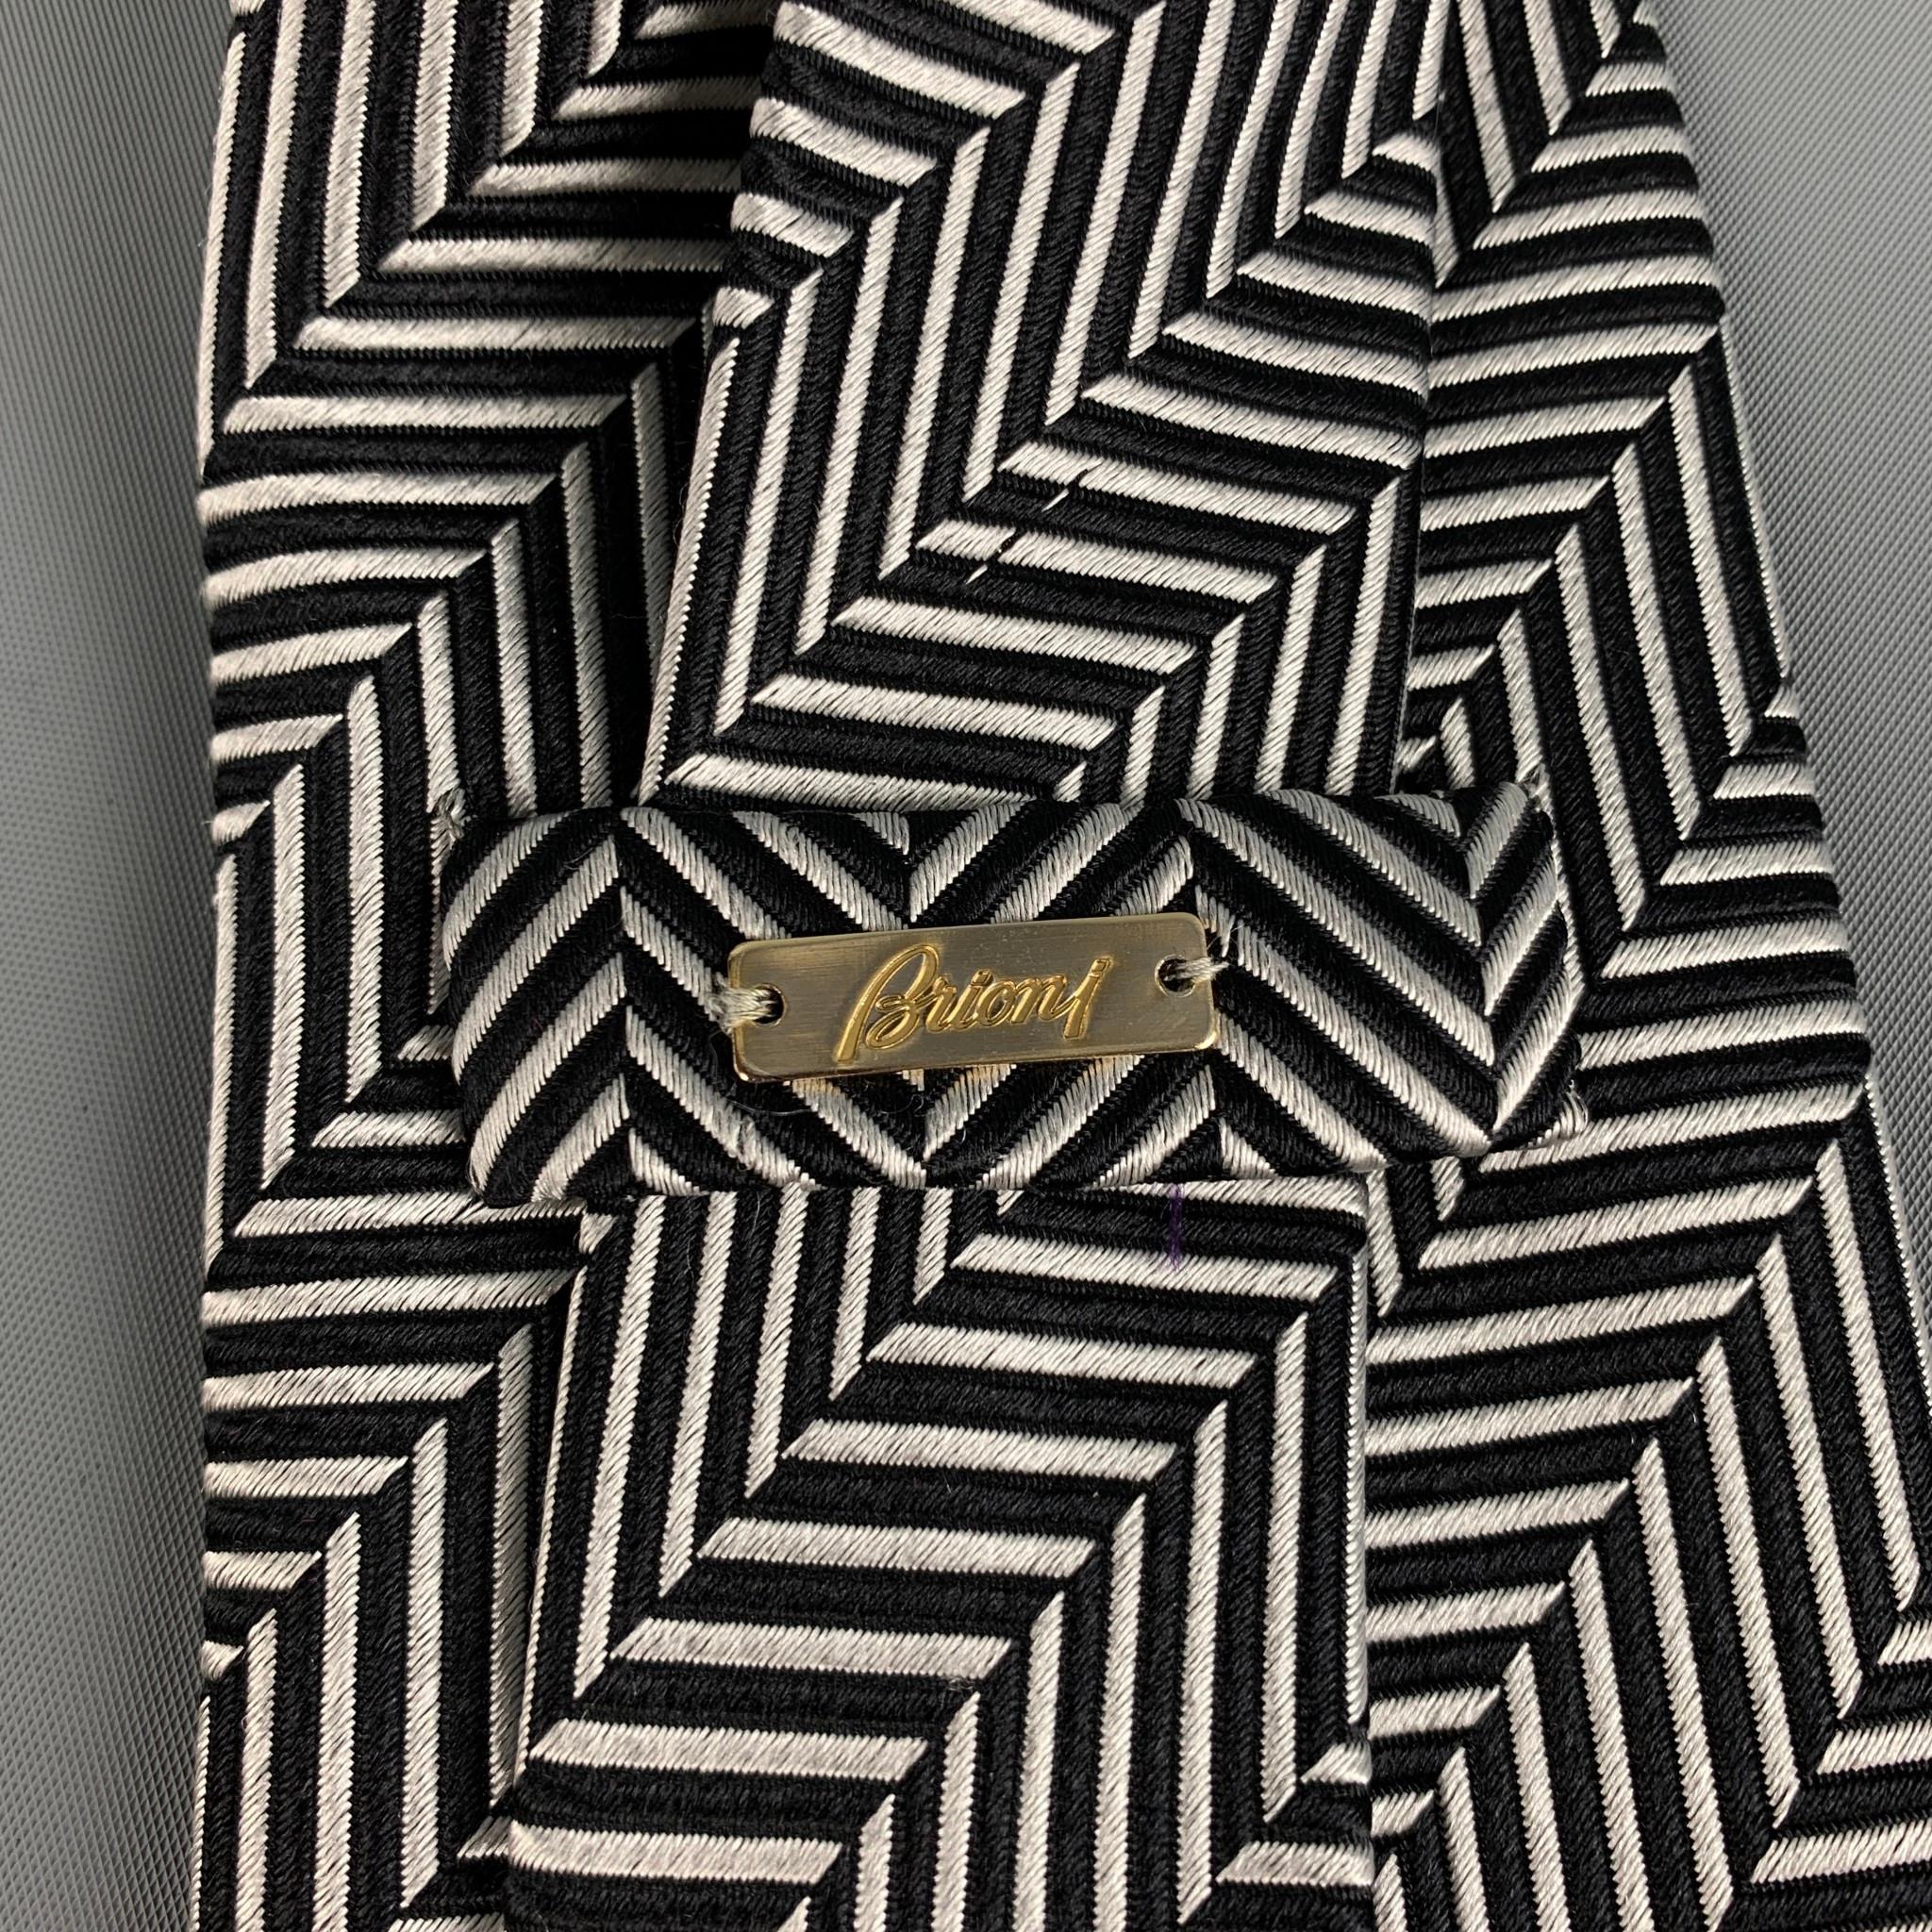 BRIONI necktie comes in a black & white silk with a all over herringbone print. Made in Italy.

Very Good Pre-Owned Condition.
Original Retail Price: $330.00

Width: 3.75 in.
Length: 62 in. 